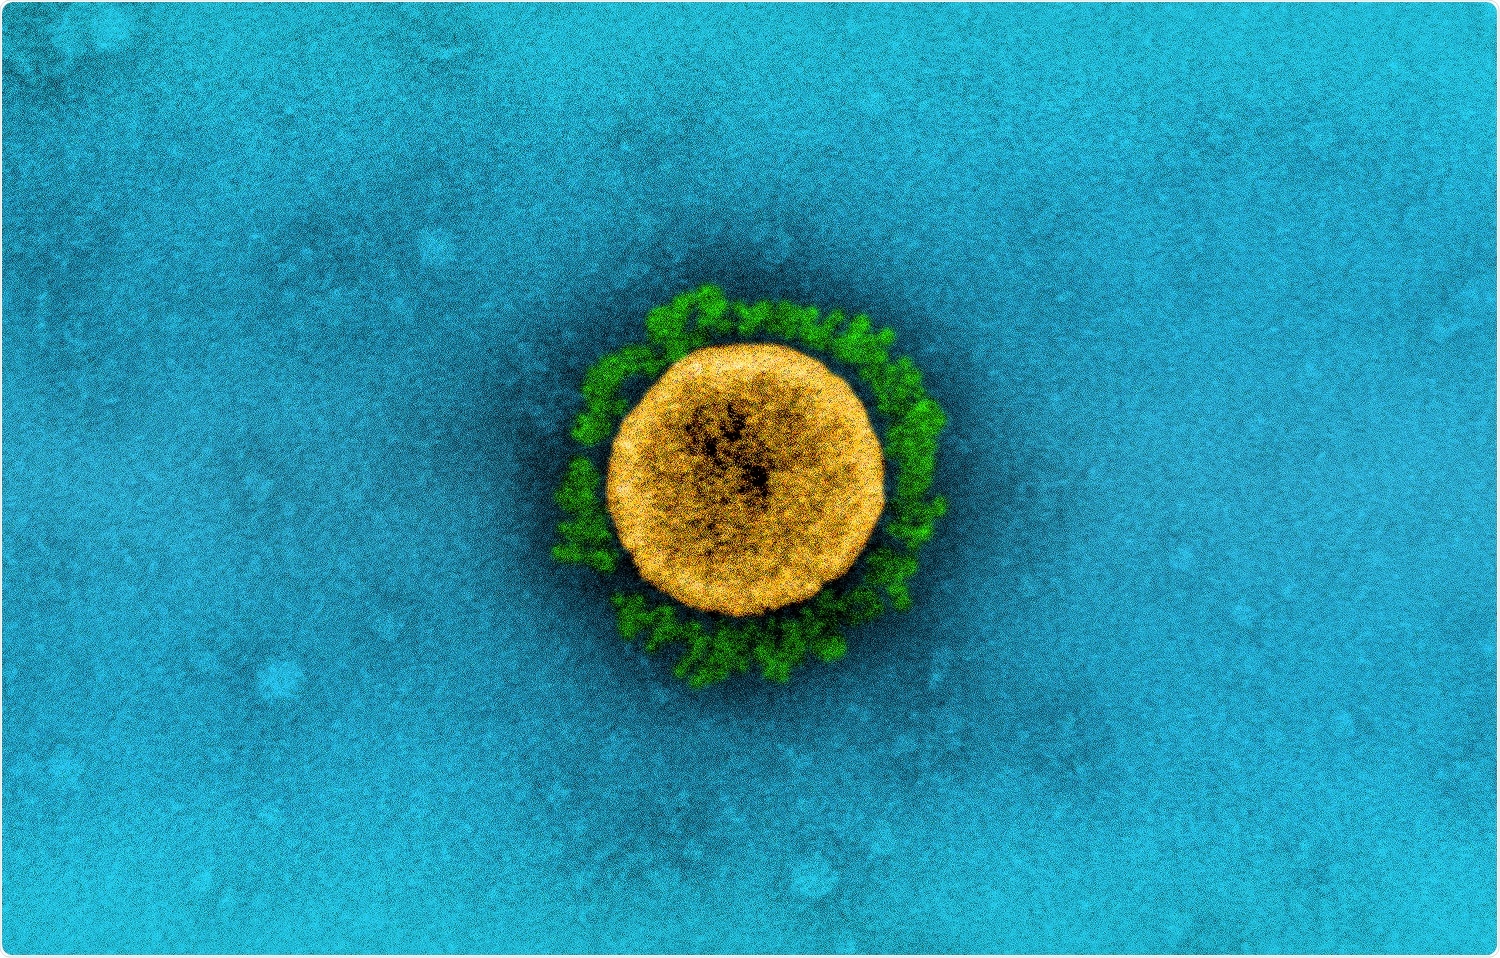 Study: SARS-CoV-2 Lambda Variant Remains Susceptible to Neutralization by mRNA Vaccine-elicited Antibodies and Convalescent Serum. Image Credit: NIAID